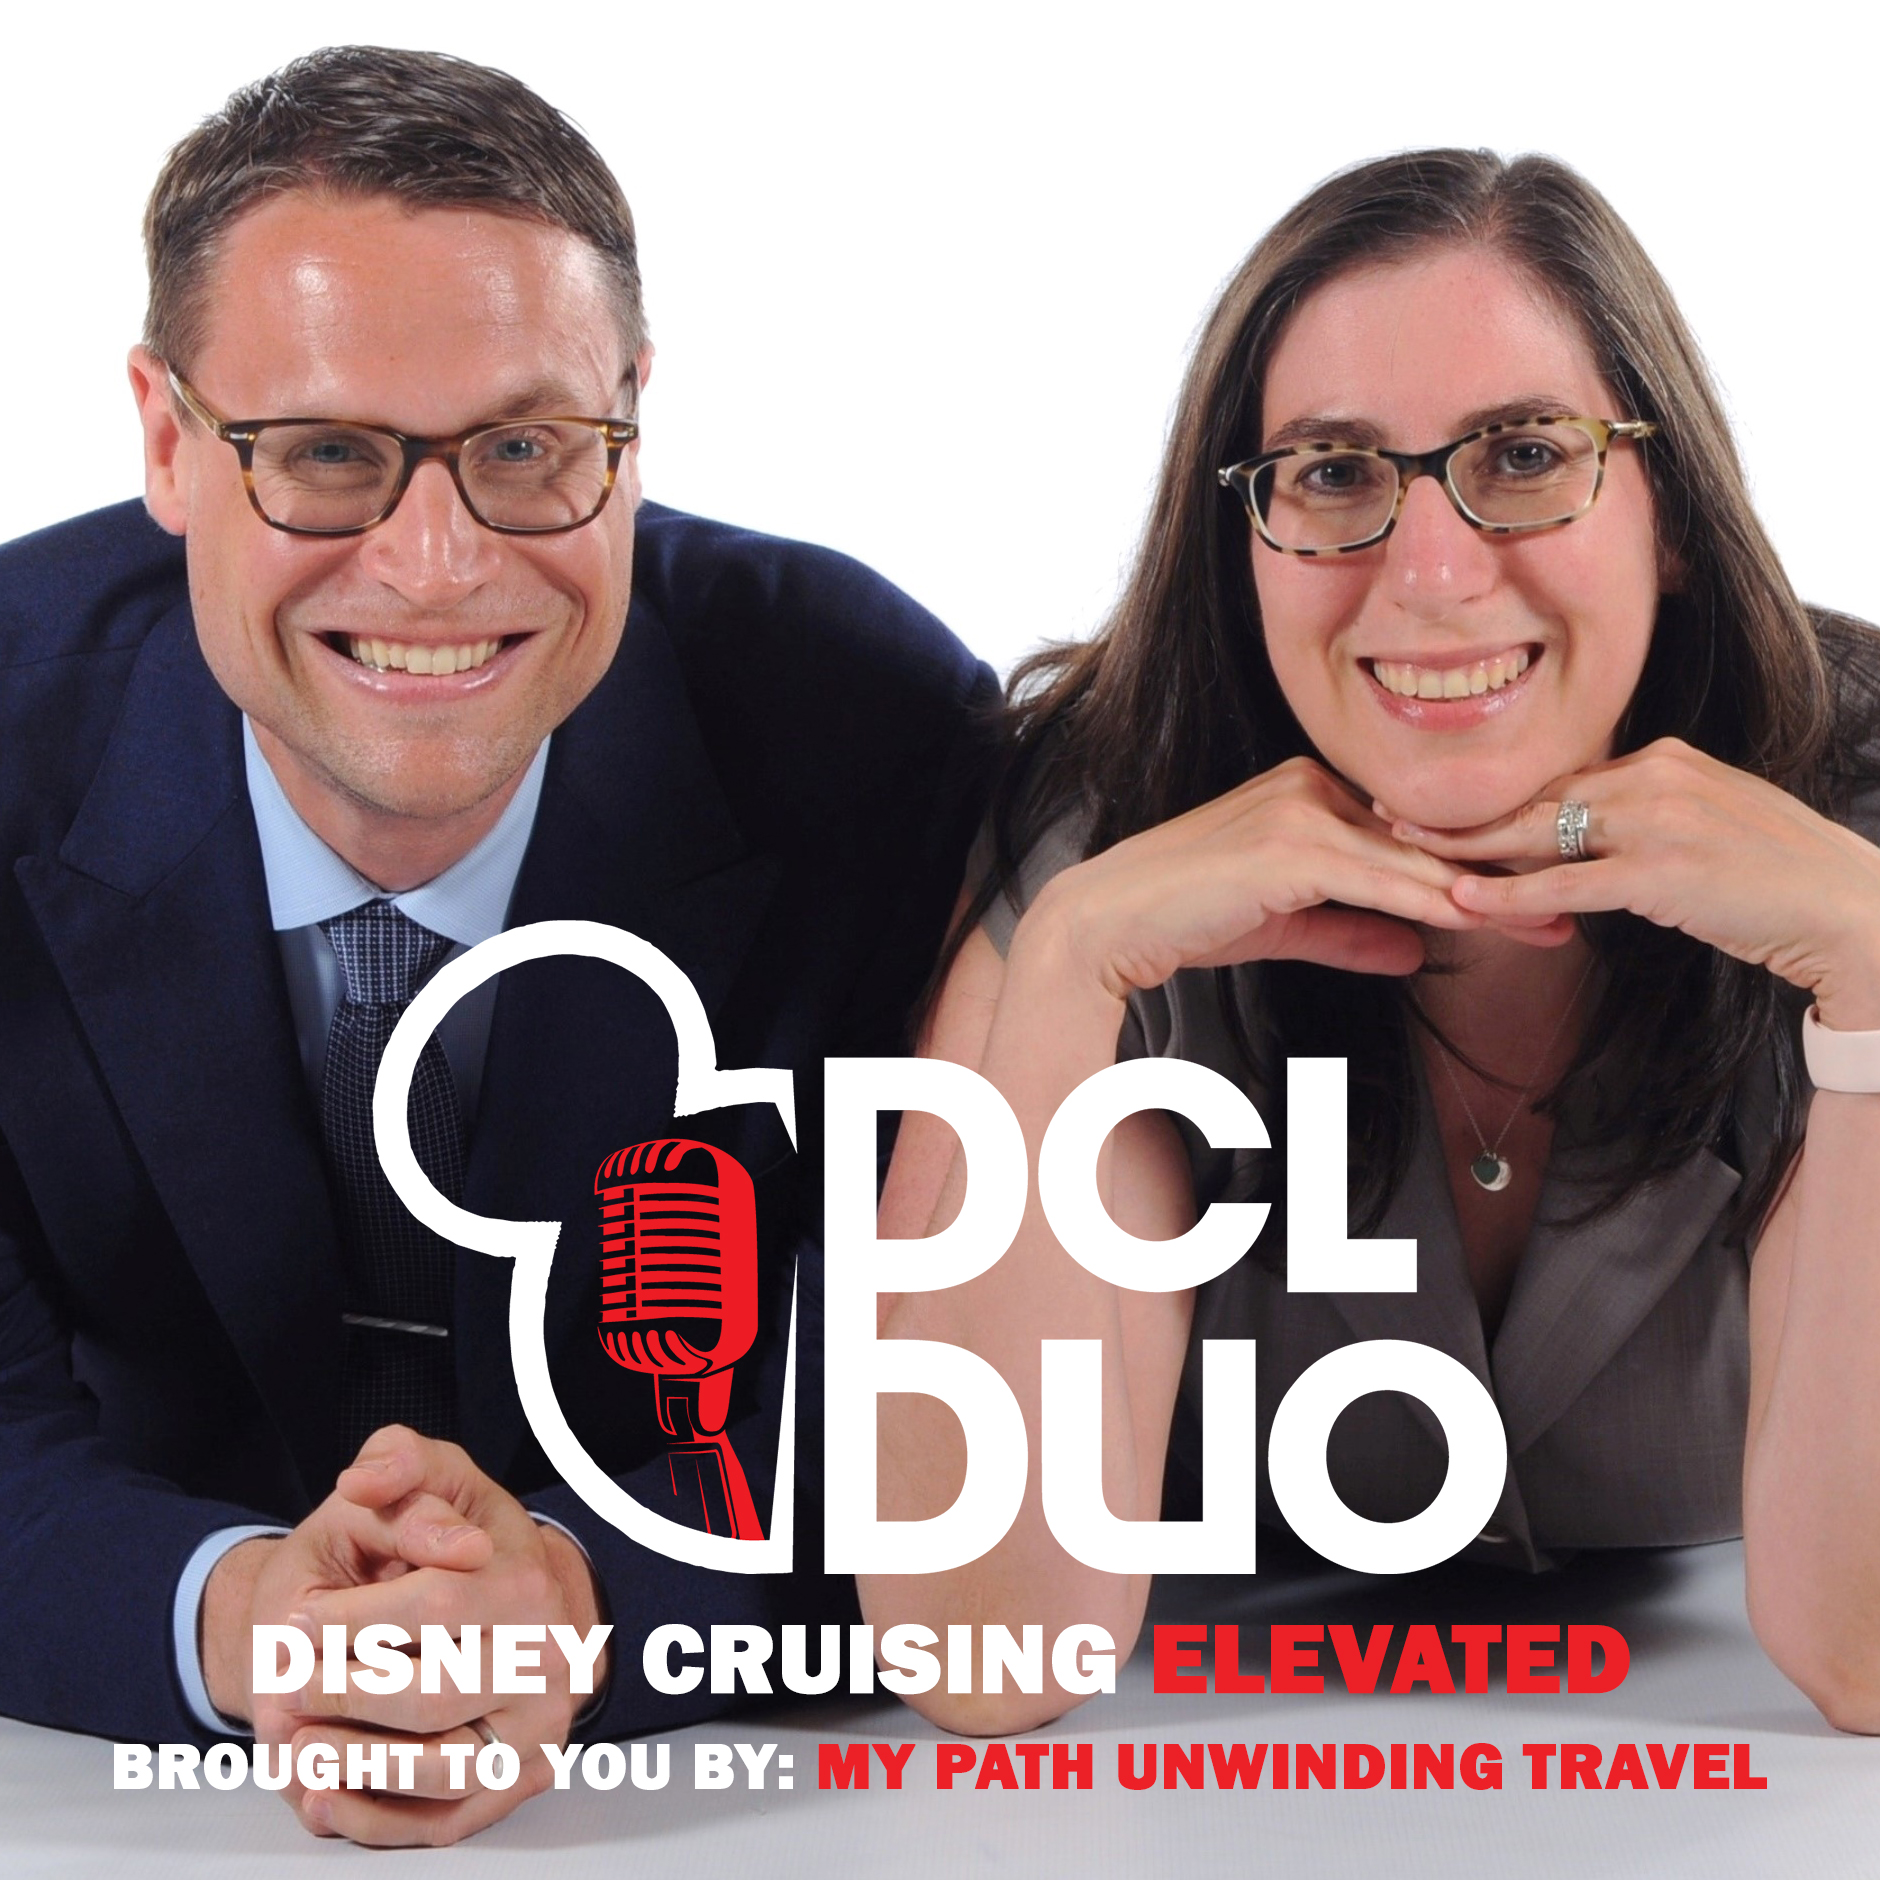 Ep. 340 - Around the World in 24 Days: An Adventures by Disney Private Jet Tour